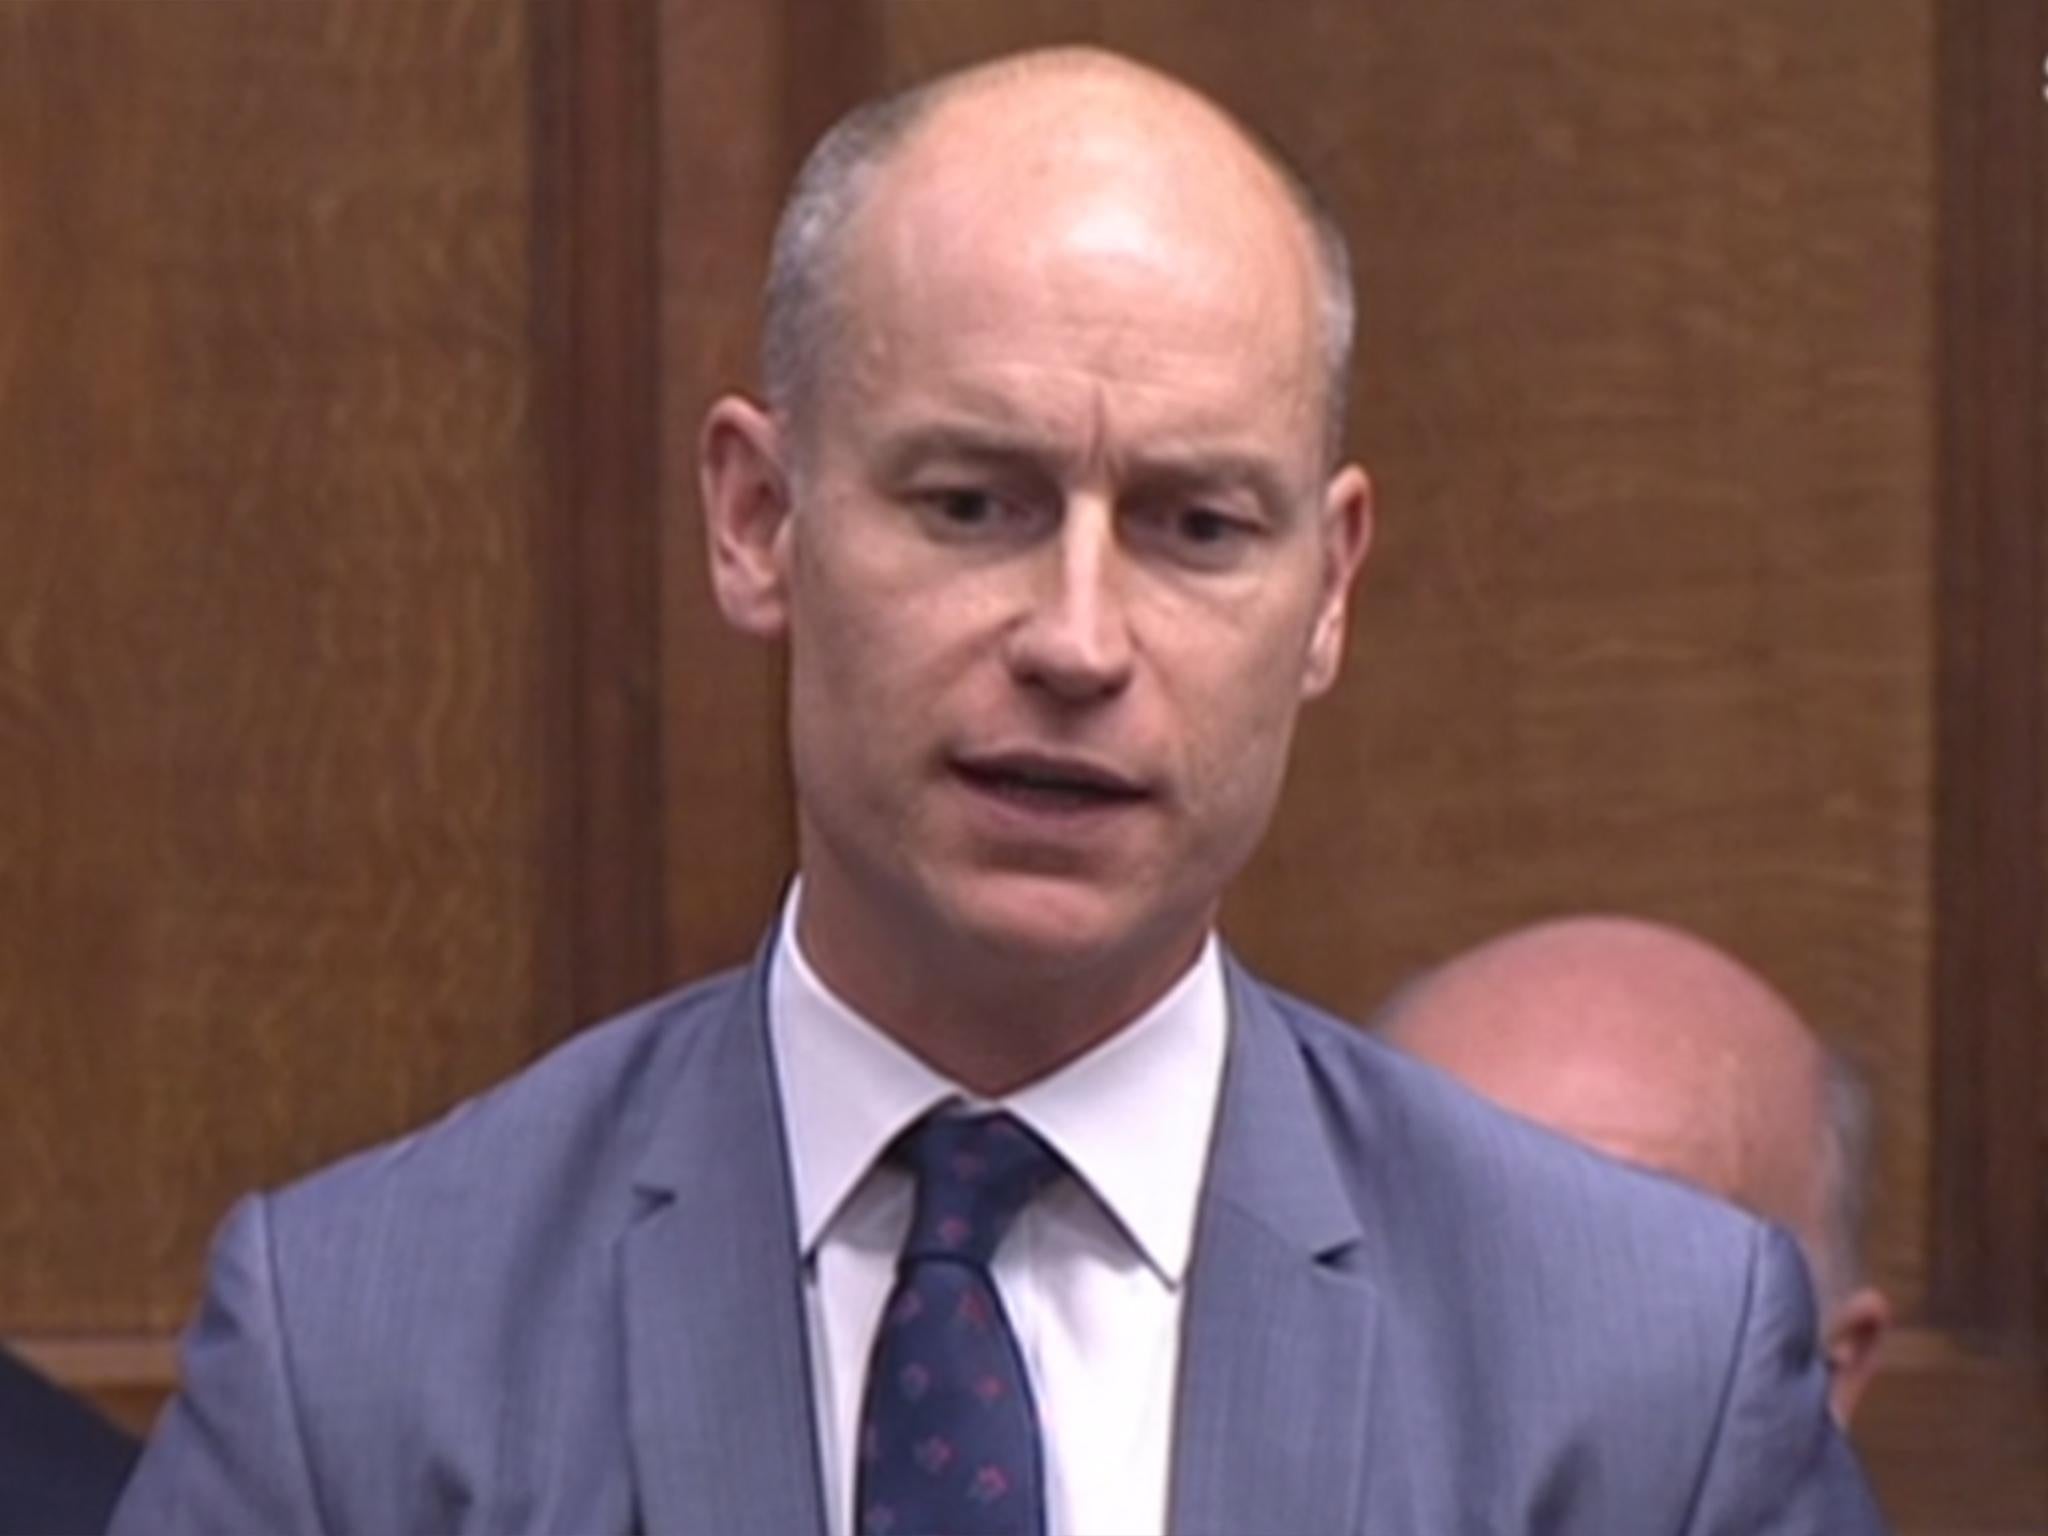 Stephen Kinnock said May’s renegotiated agreement constituted the foundations of a deal